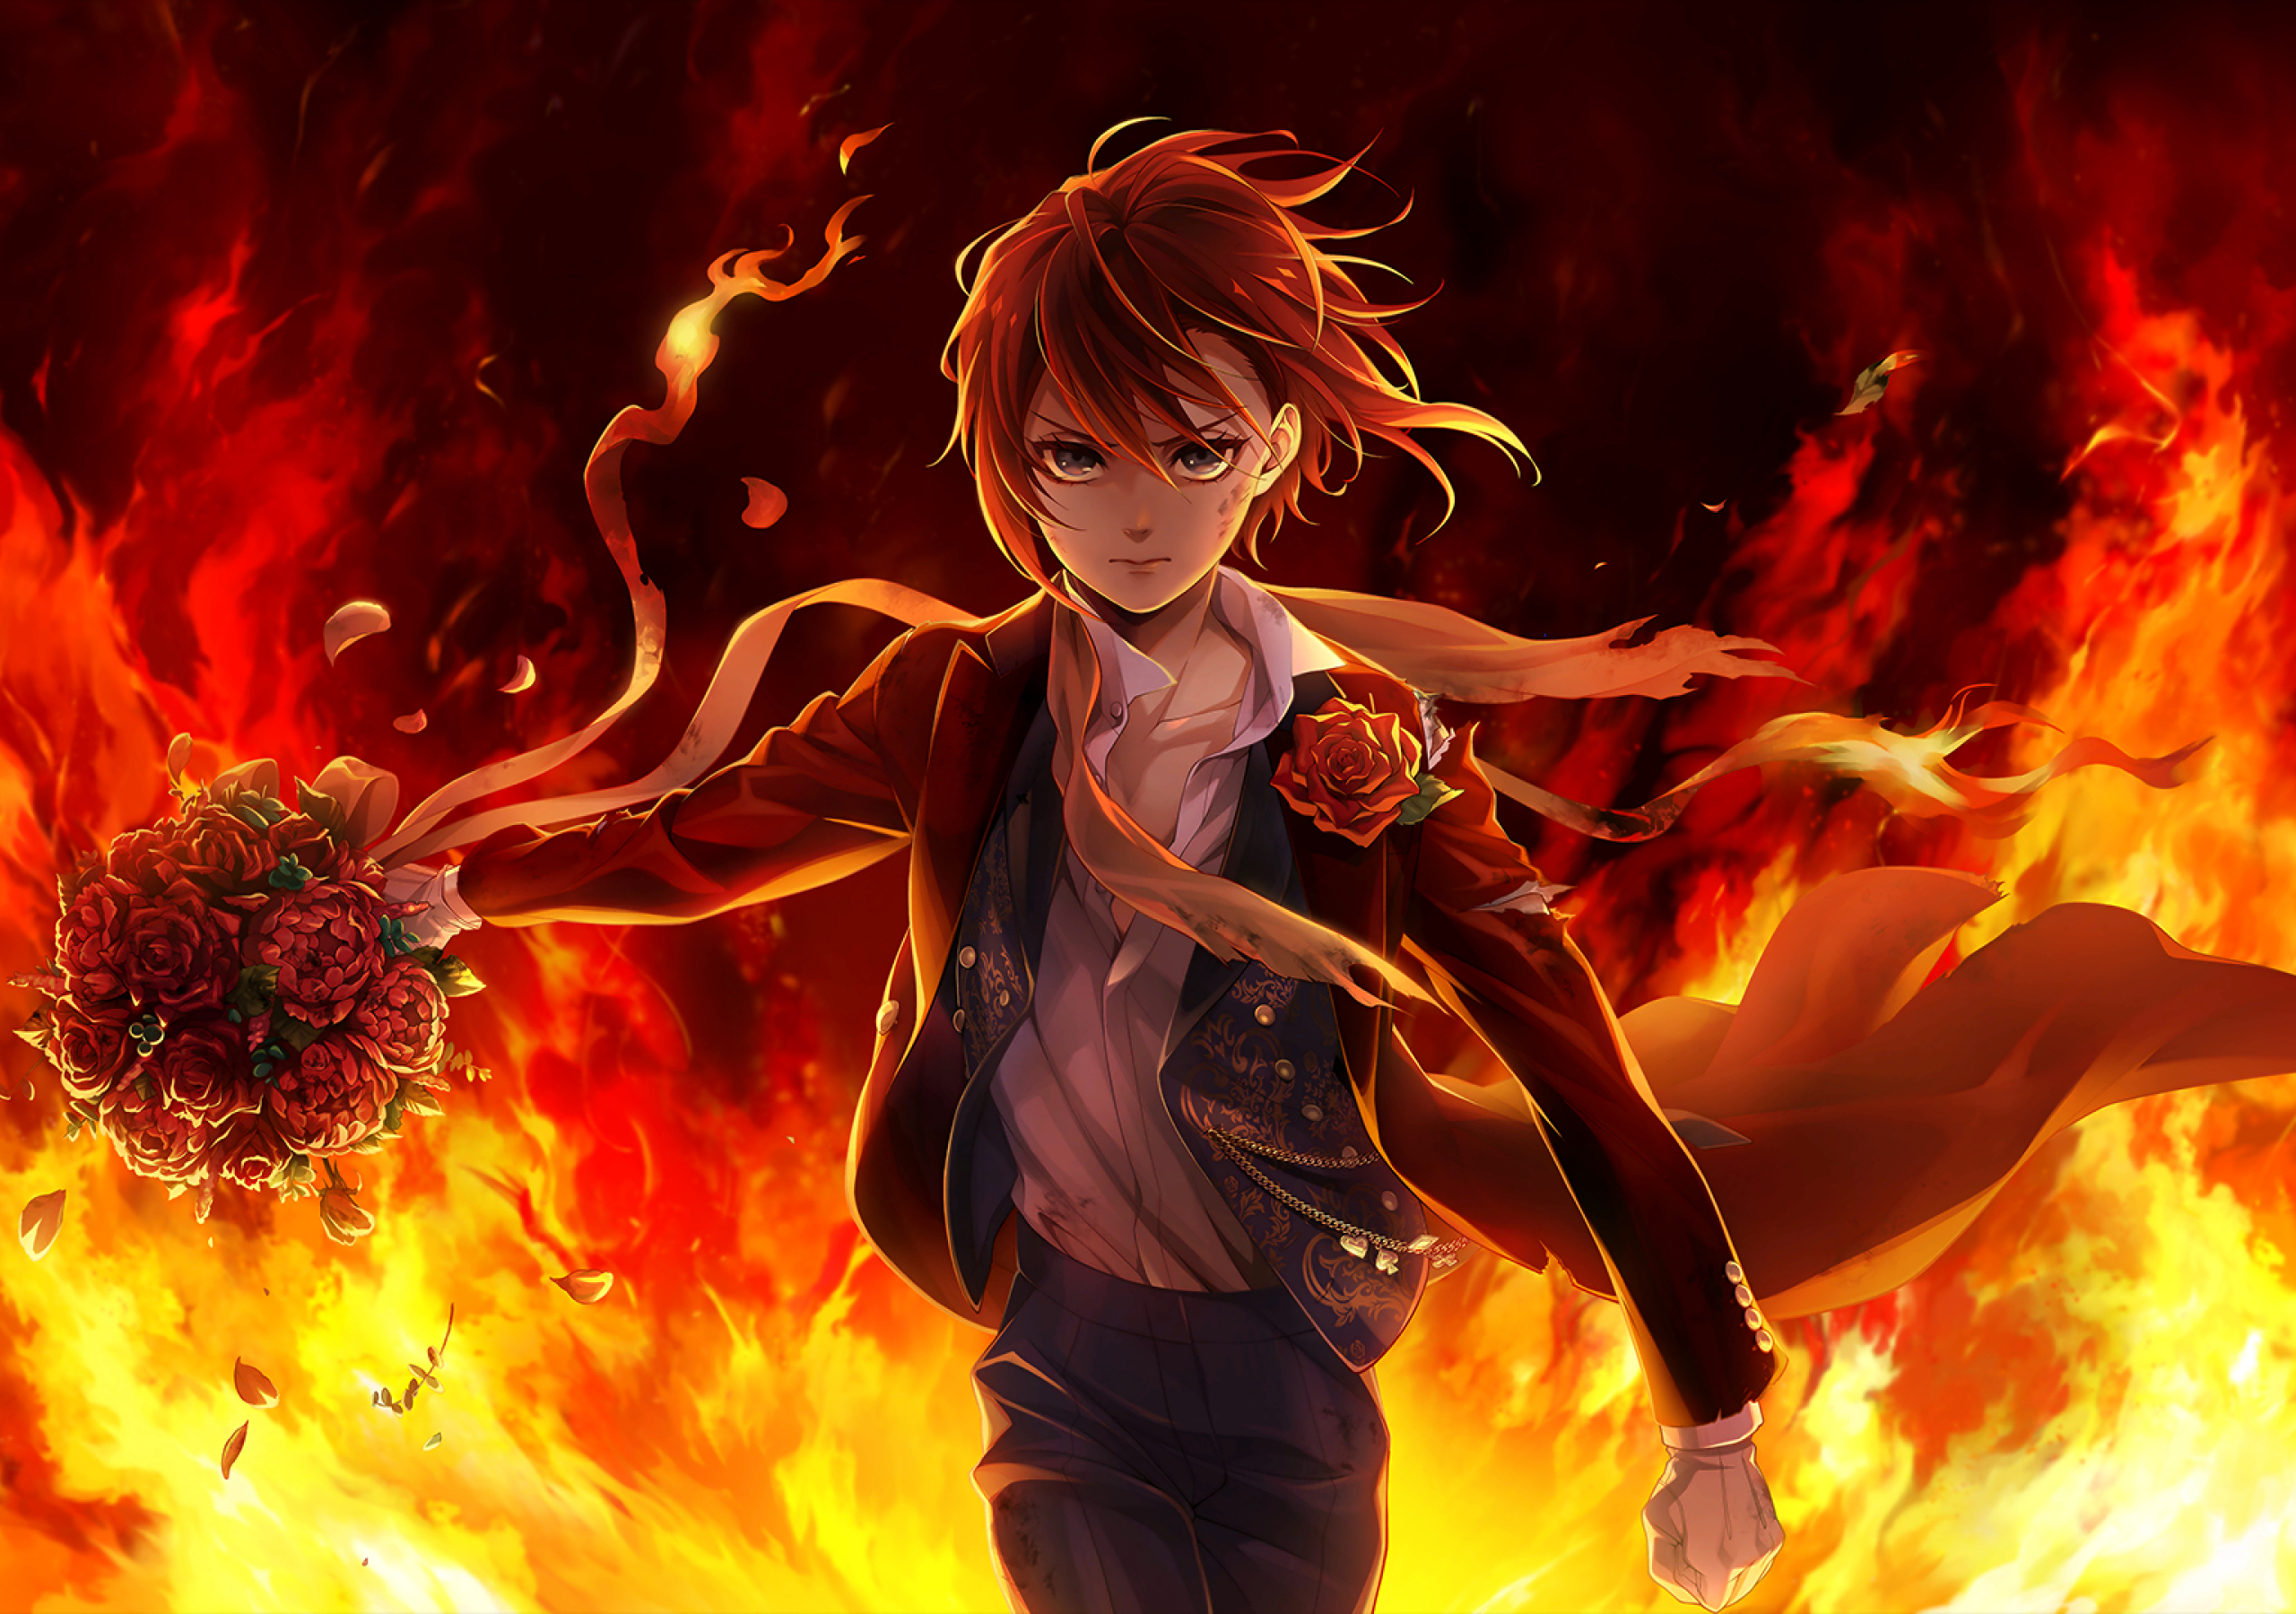 17+ GREAT Anime Characters With Fire Powers, Magic, And Abilities